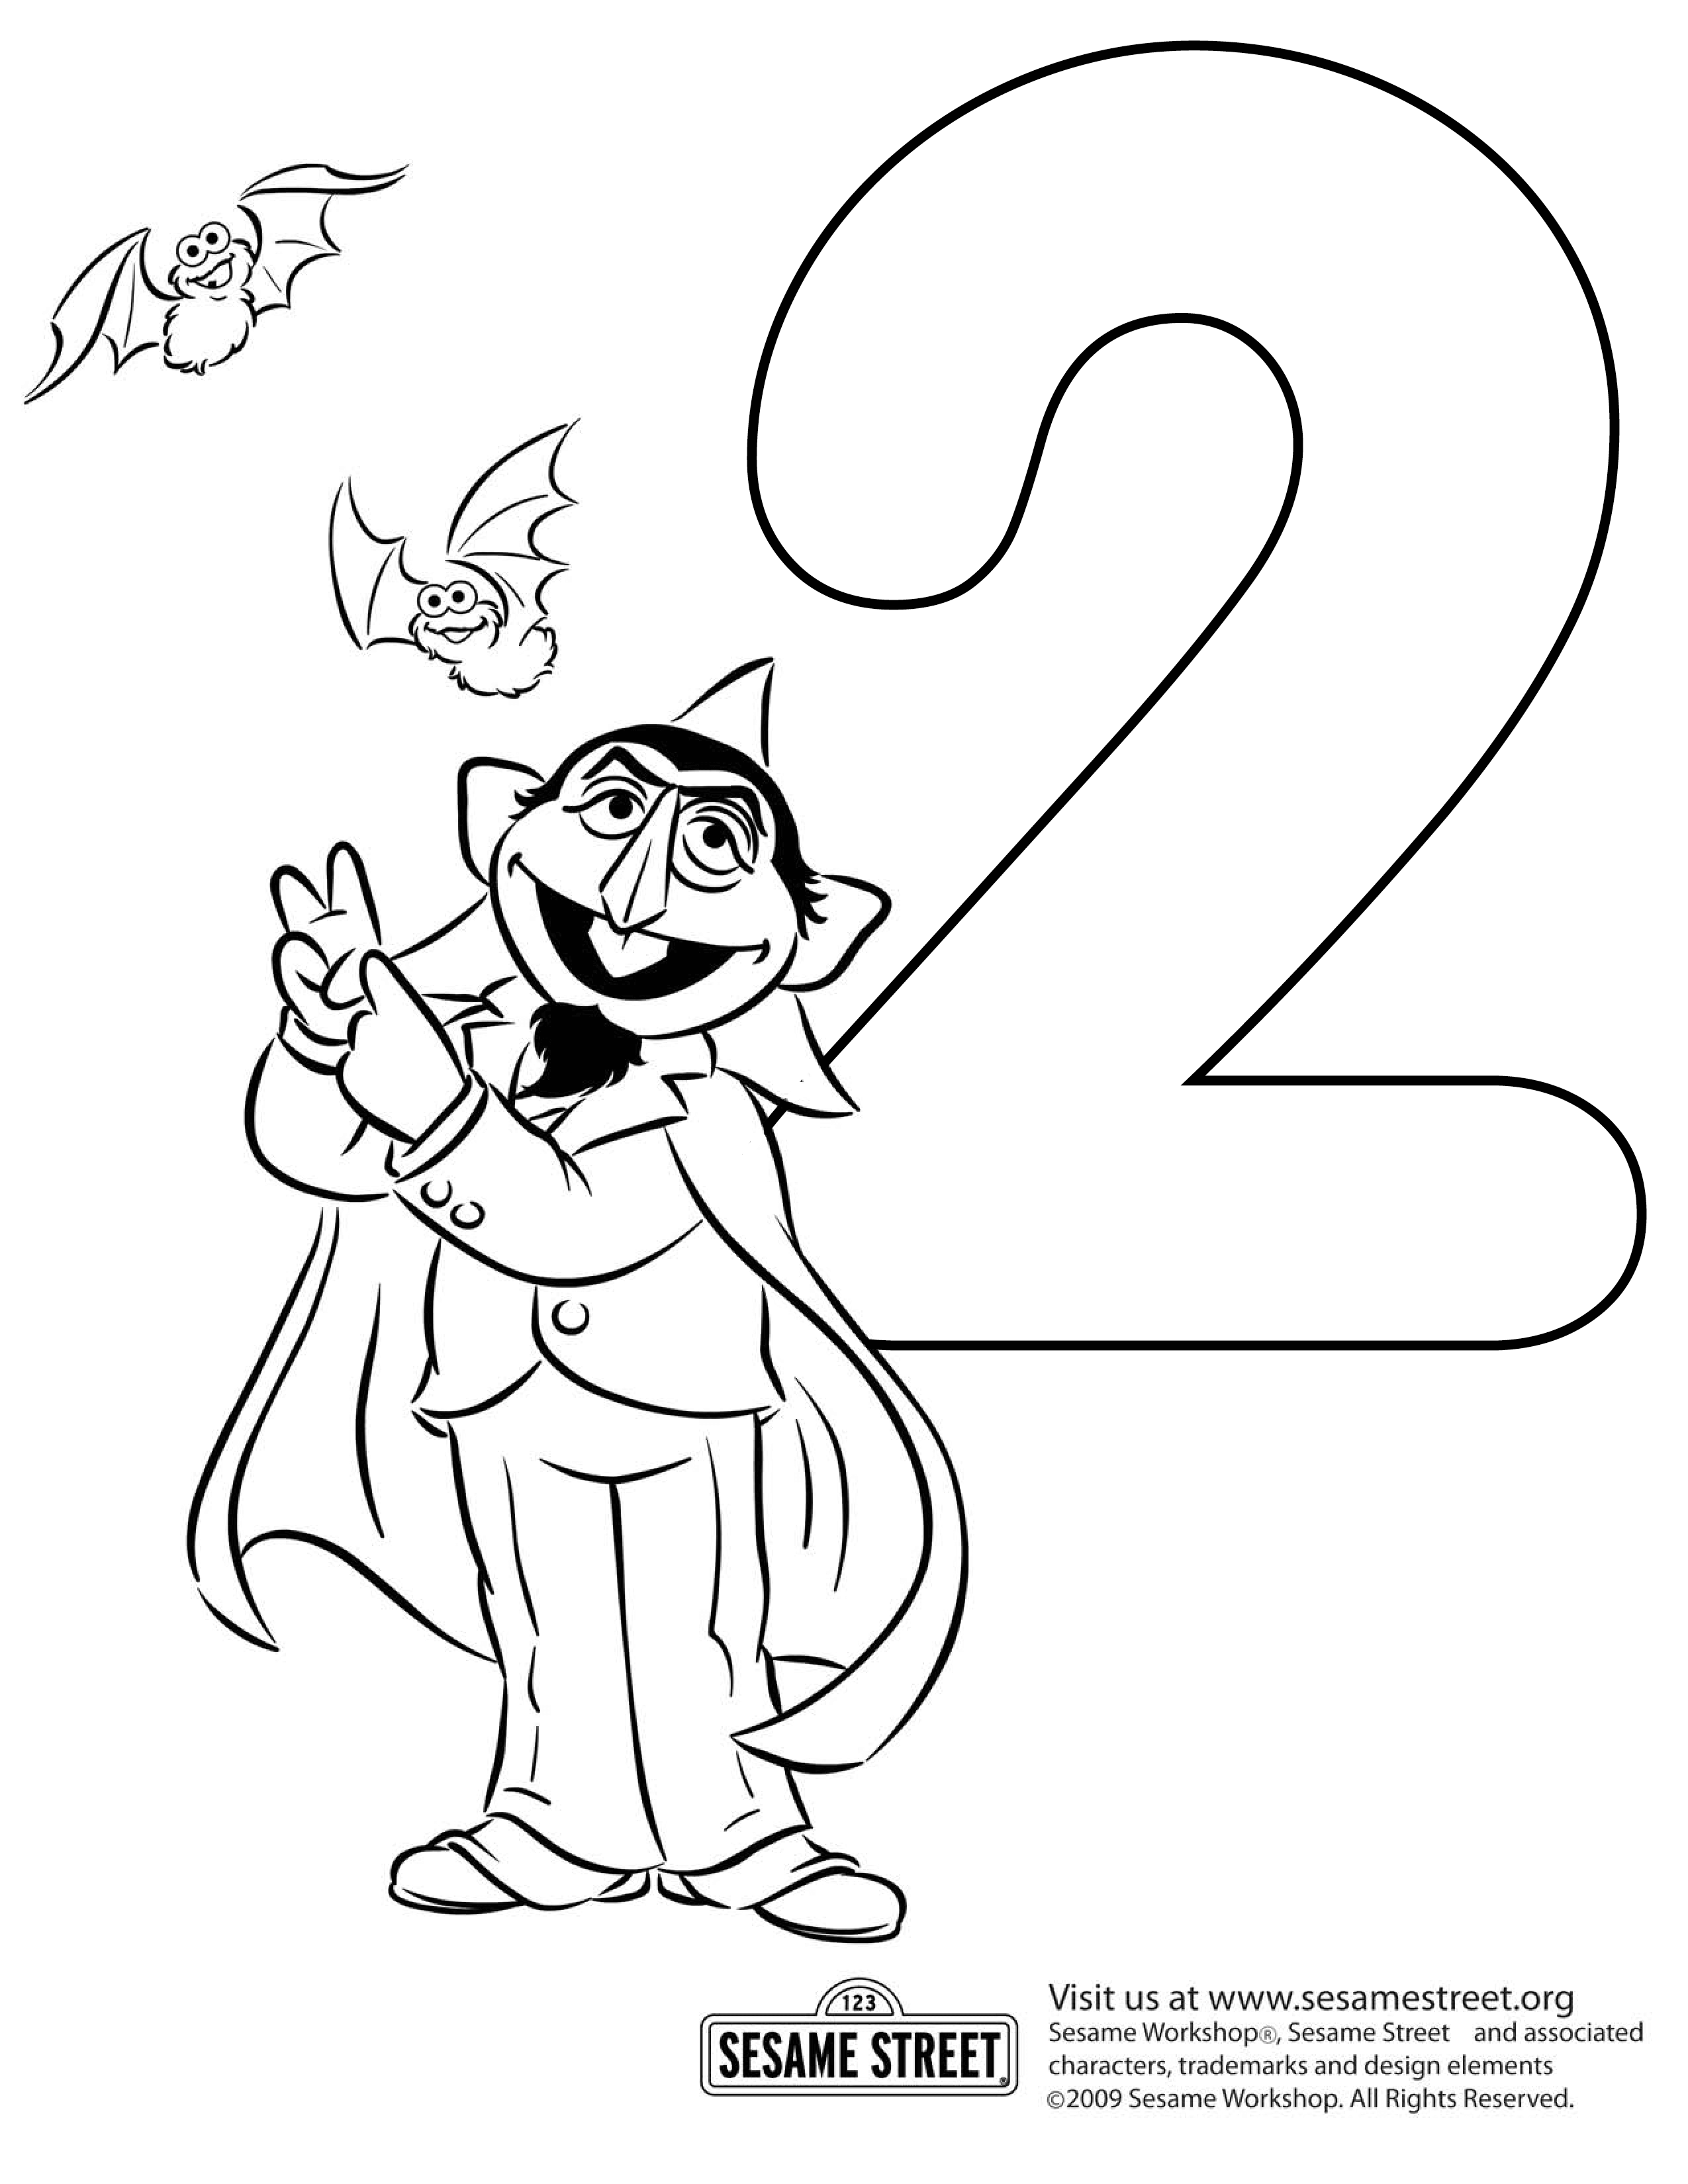 Count Number 2 Sesame Street Coloring Pages